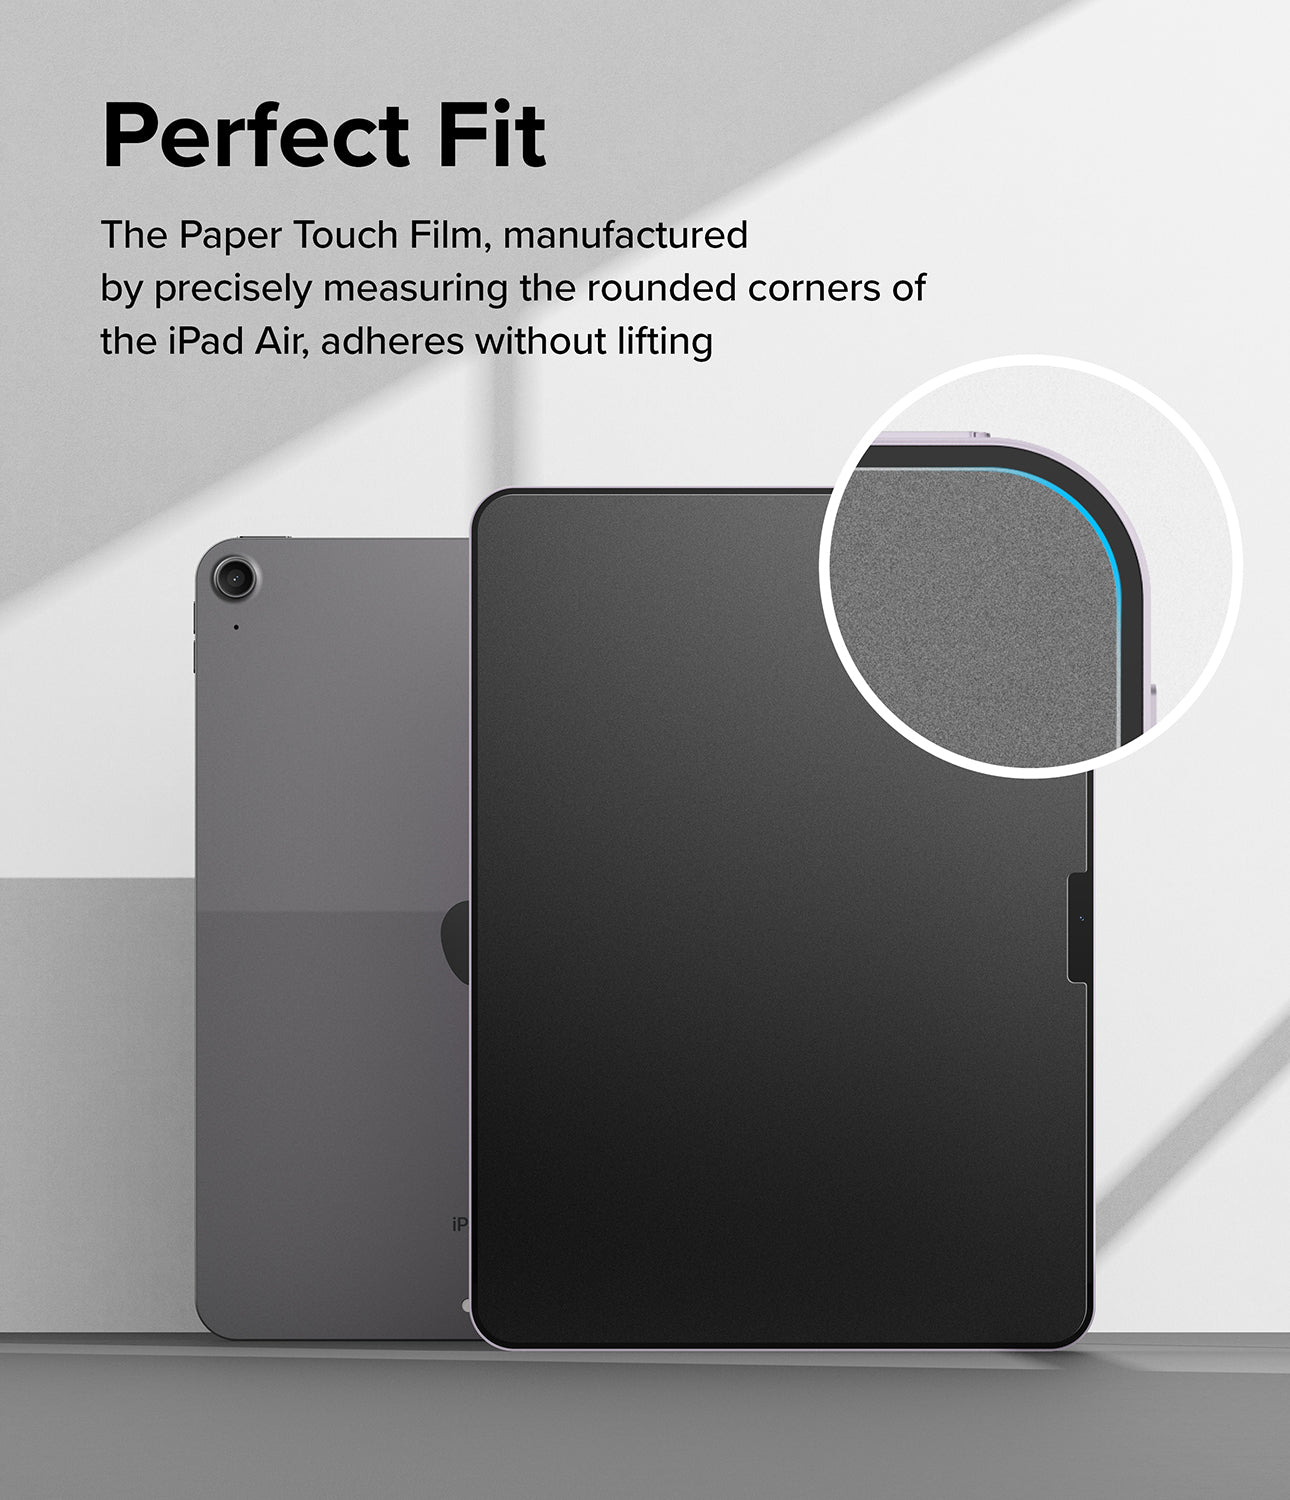 iPad Air 11" (M2) Screen Protector | Paper Touch Film - Soft - Perfect Fit. The Paper Touch Film, manufactured by precisely measuring the rounded corners of the iPad Air, adheres without lifting.